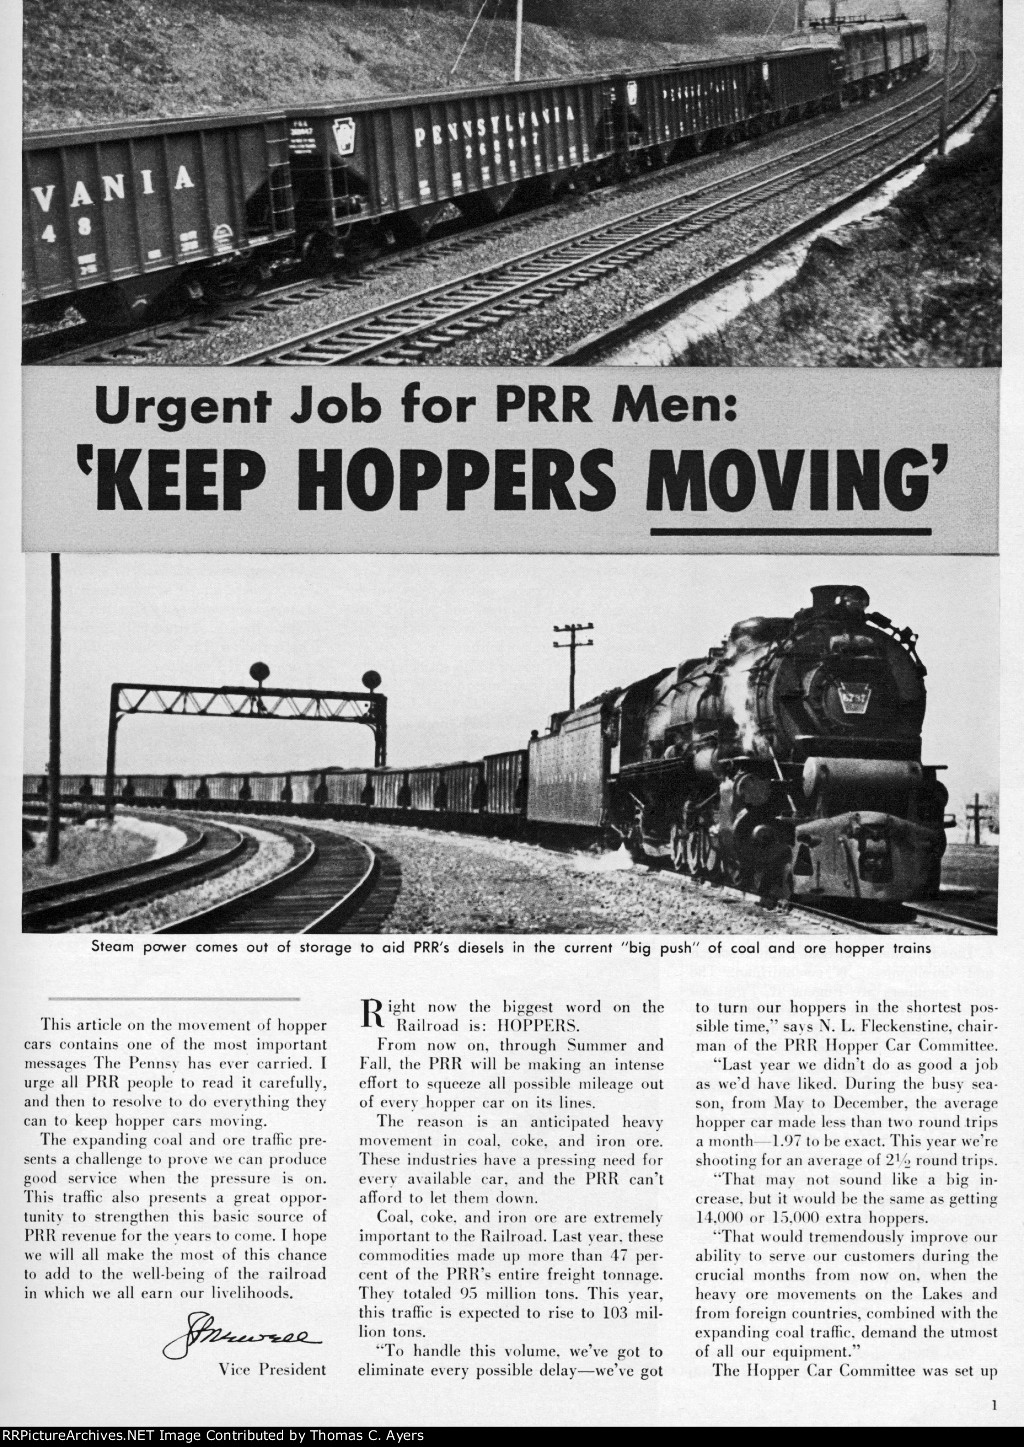 "Keep Hoppers Moving," Page 1, 1956